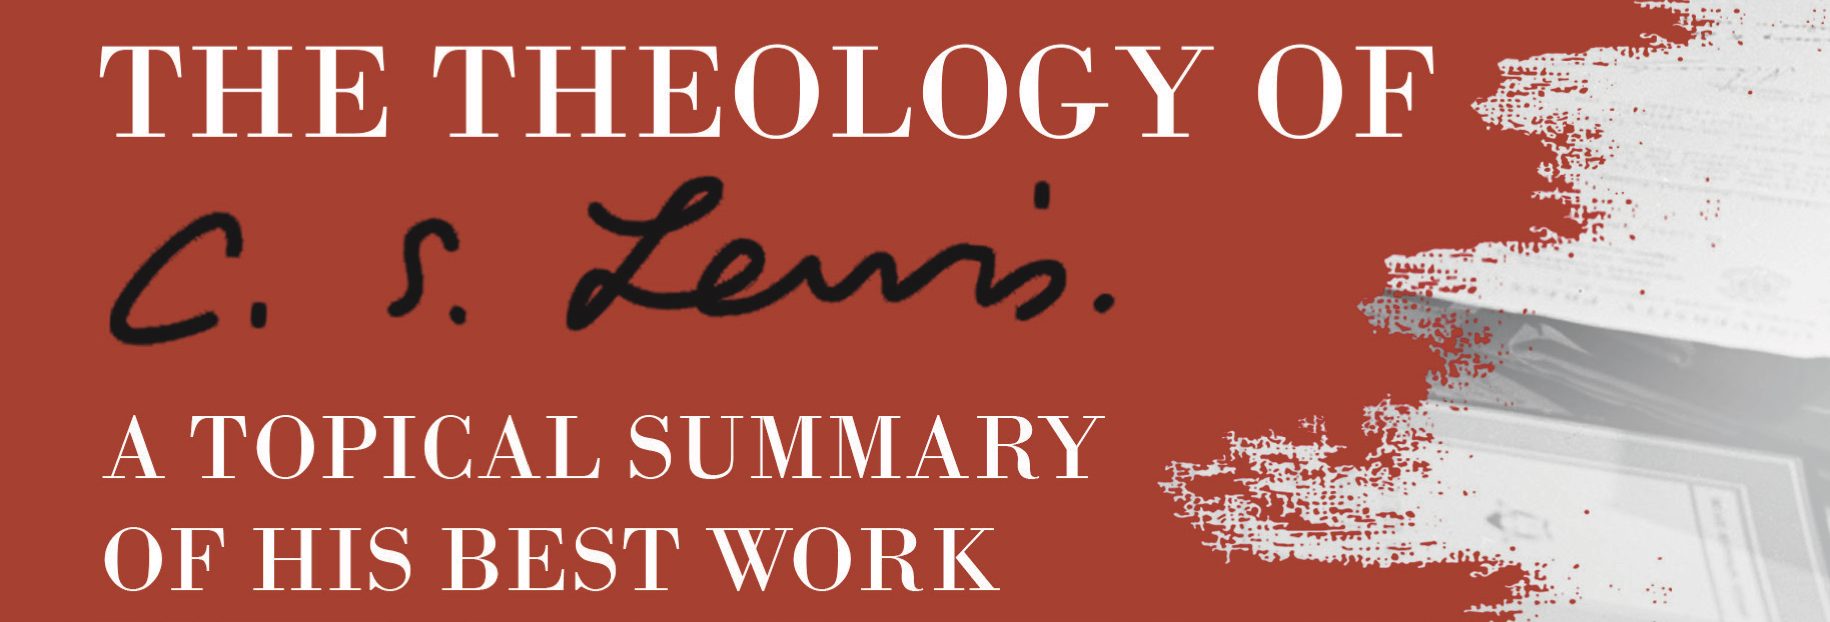 The Theology of C.S. Lewis